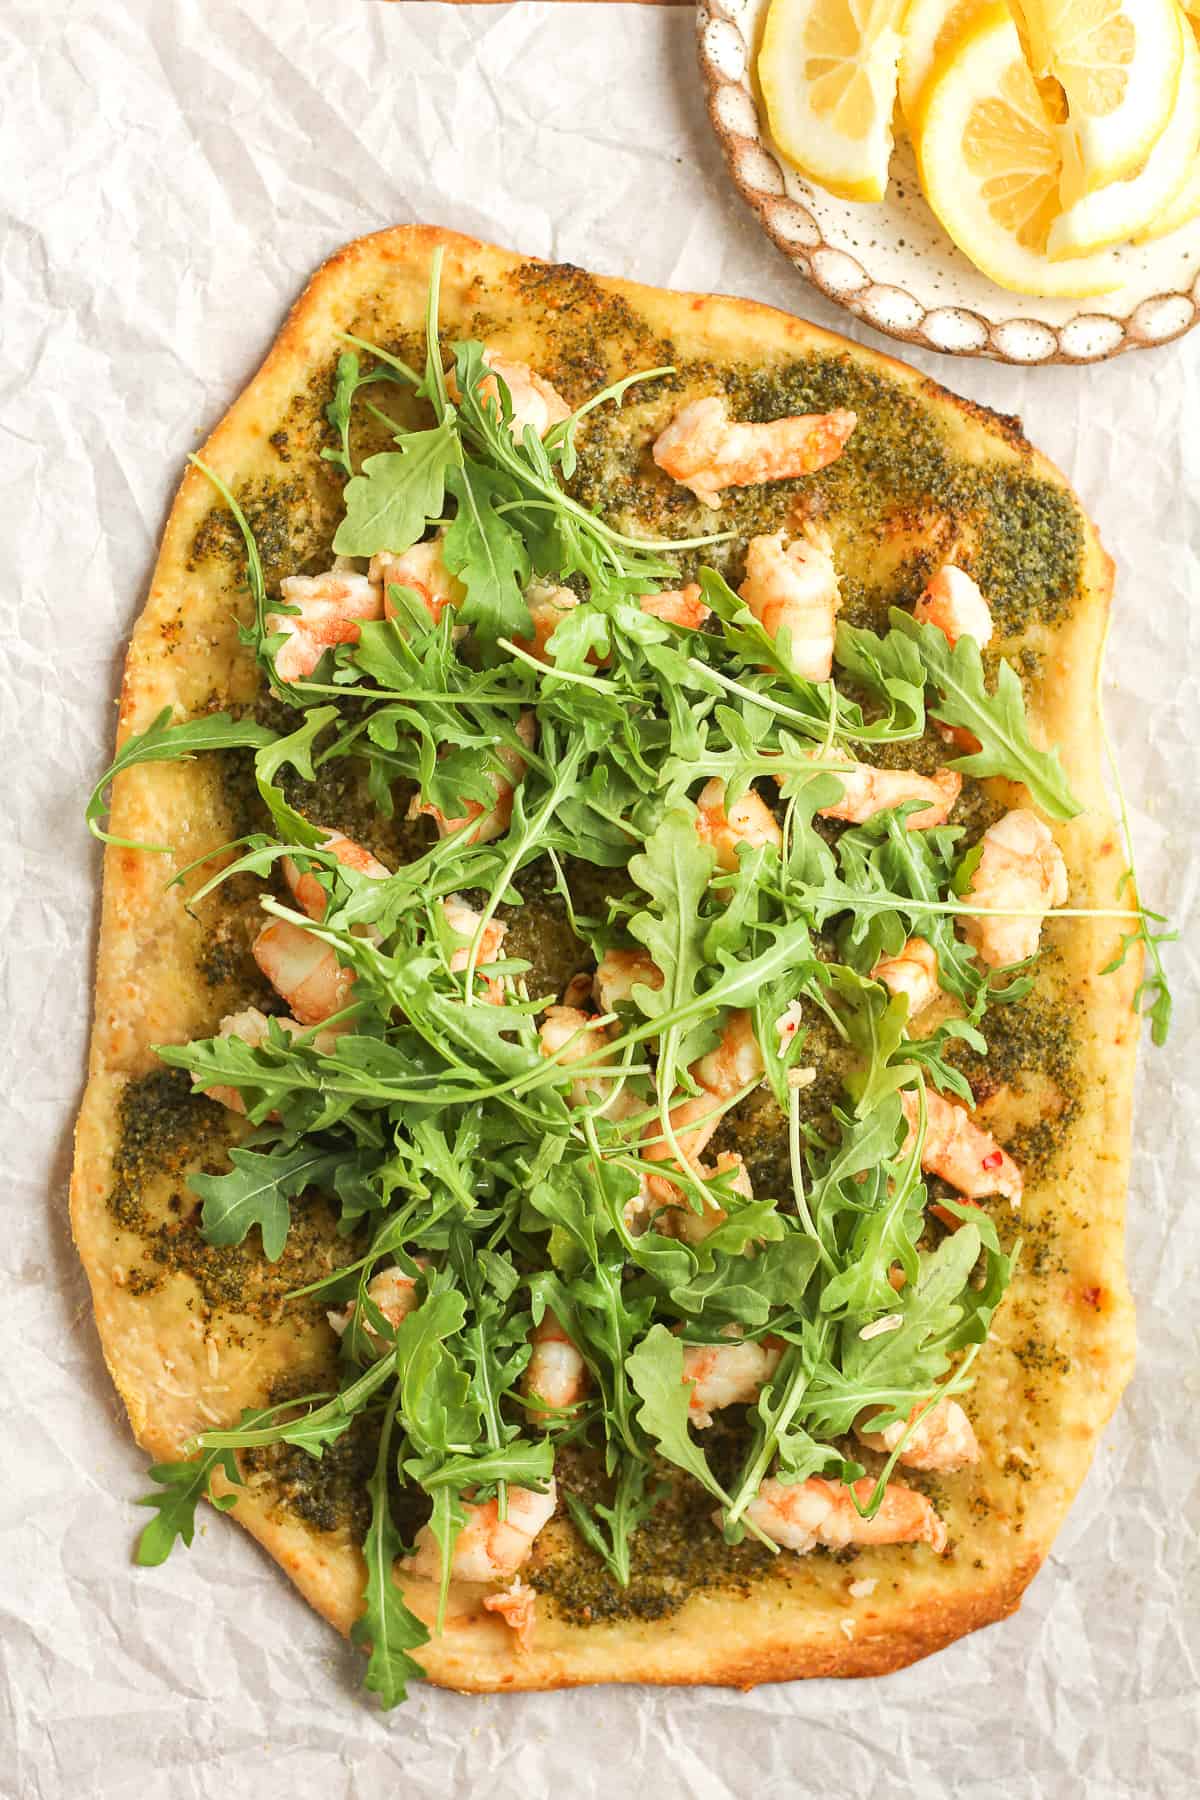 A flatbread pizza just baked with shrimp and arugula.